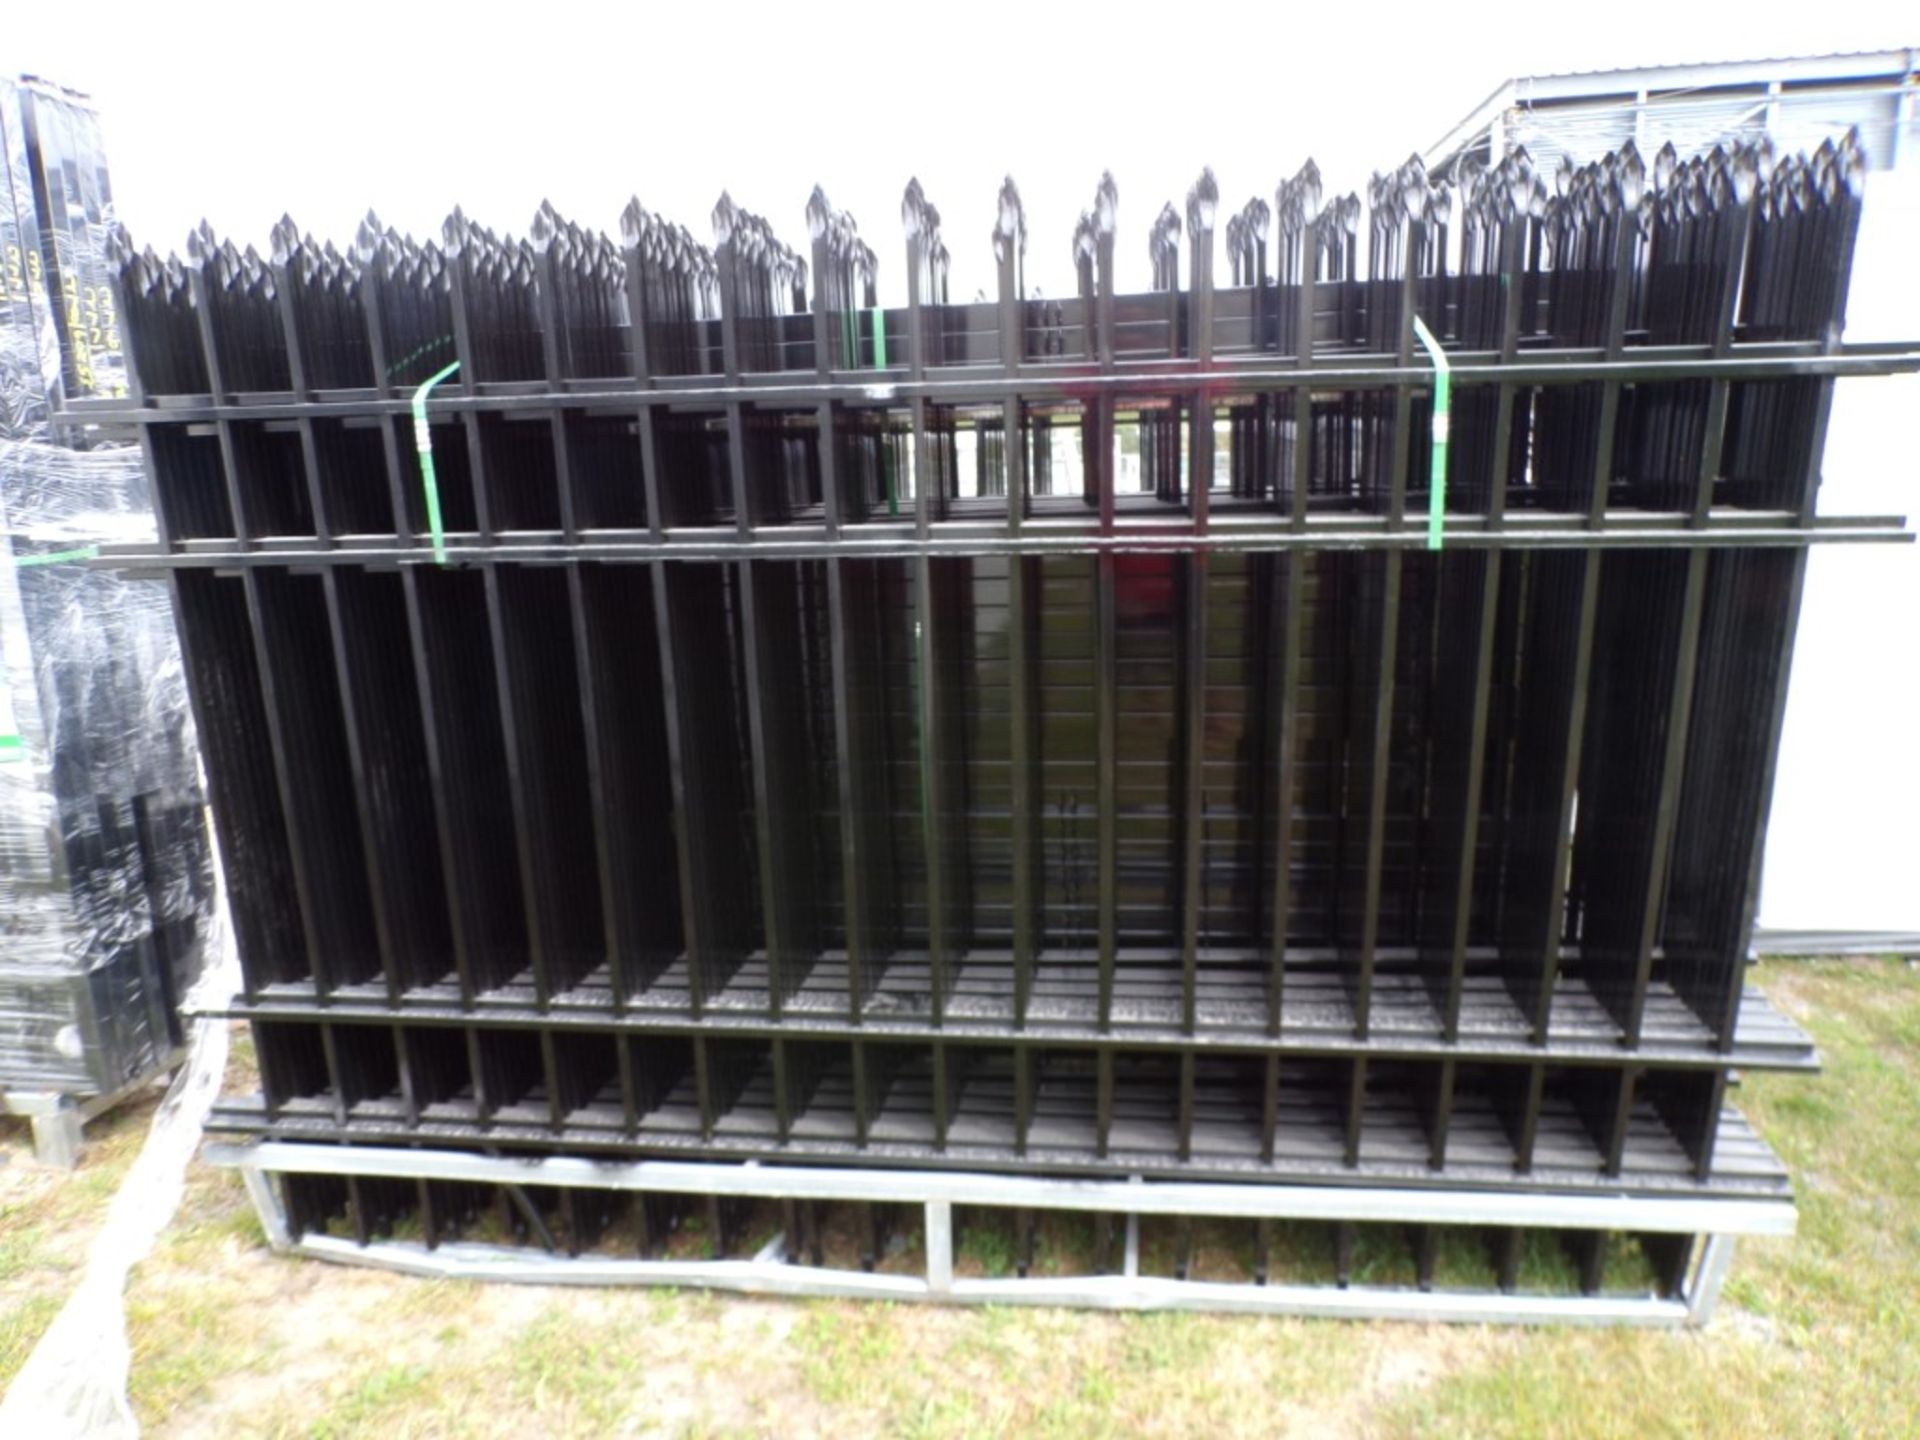 (22) Pcs of New 9 1/2' Black Fencing w/Hardware and Connector Pcs (5211)